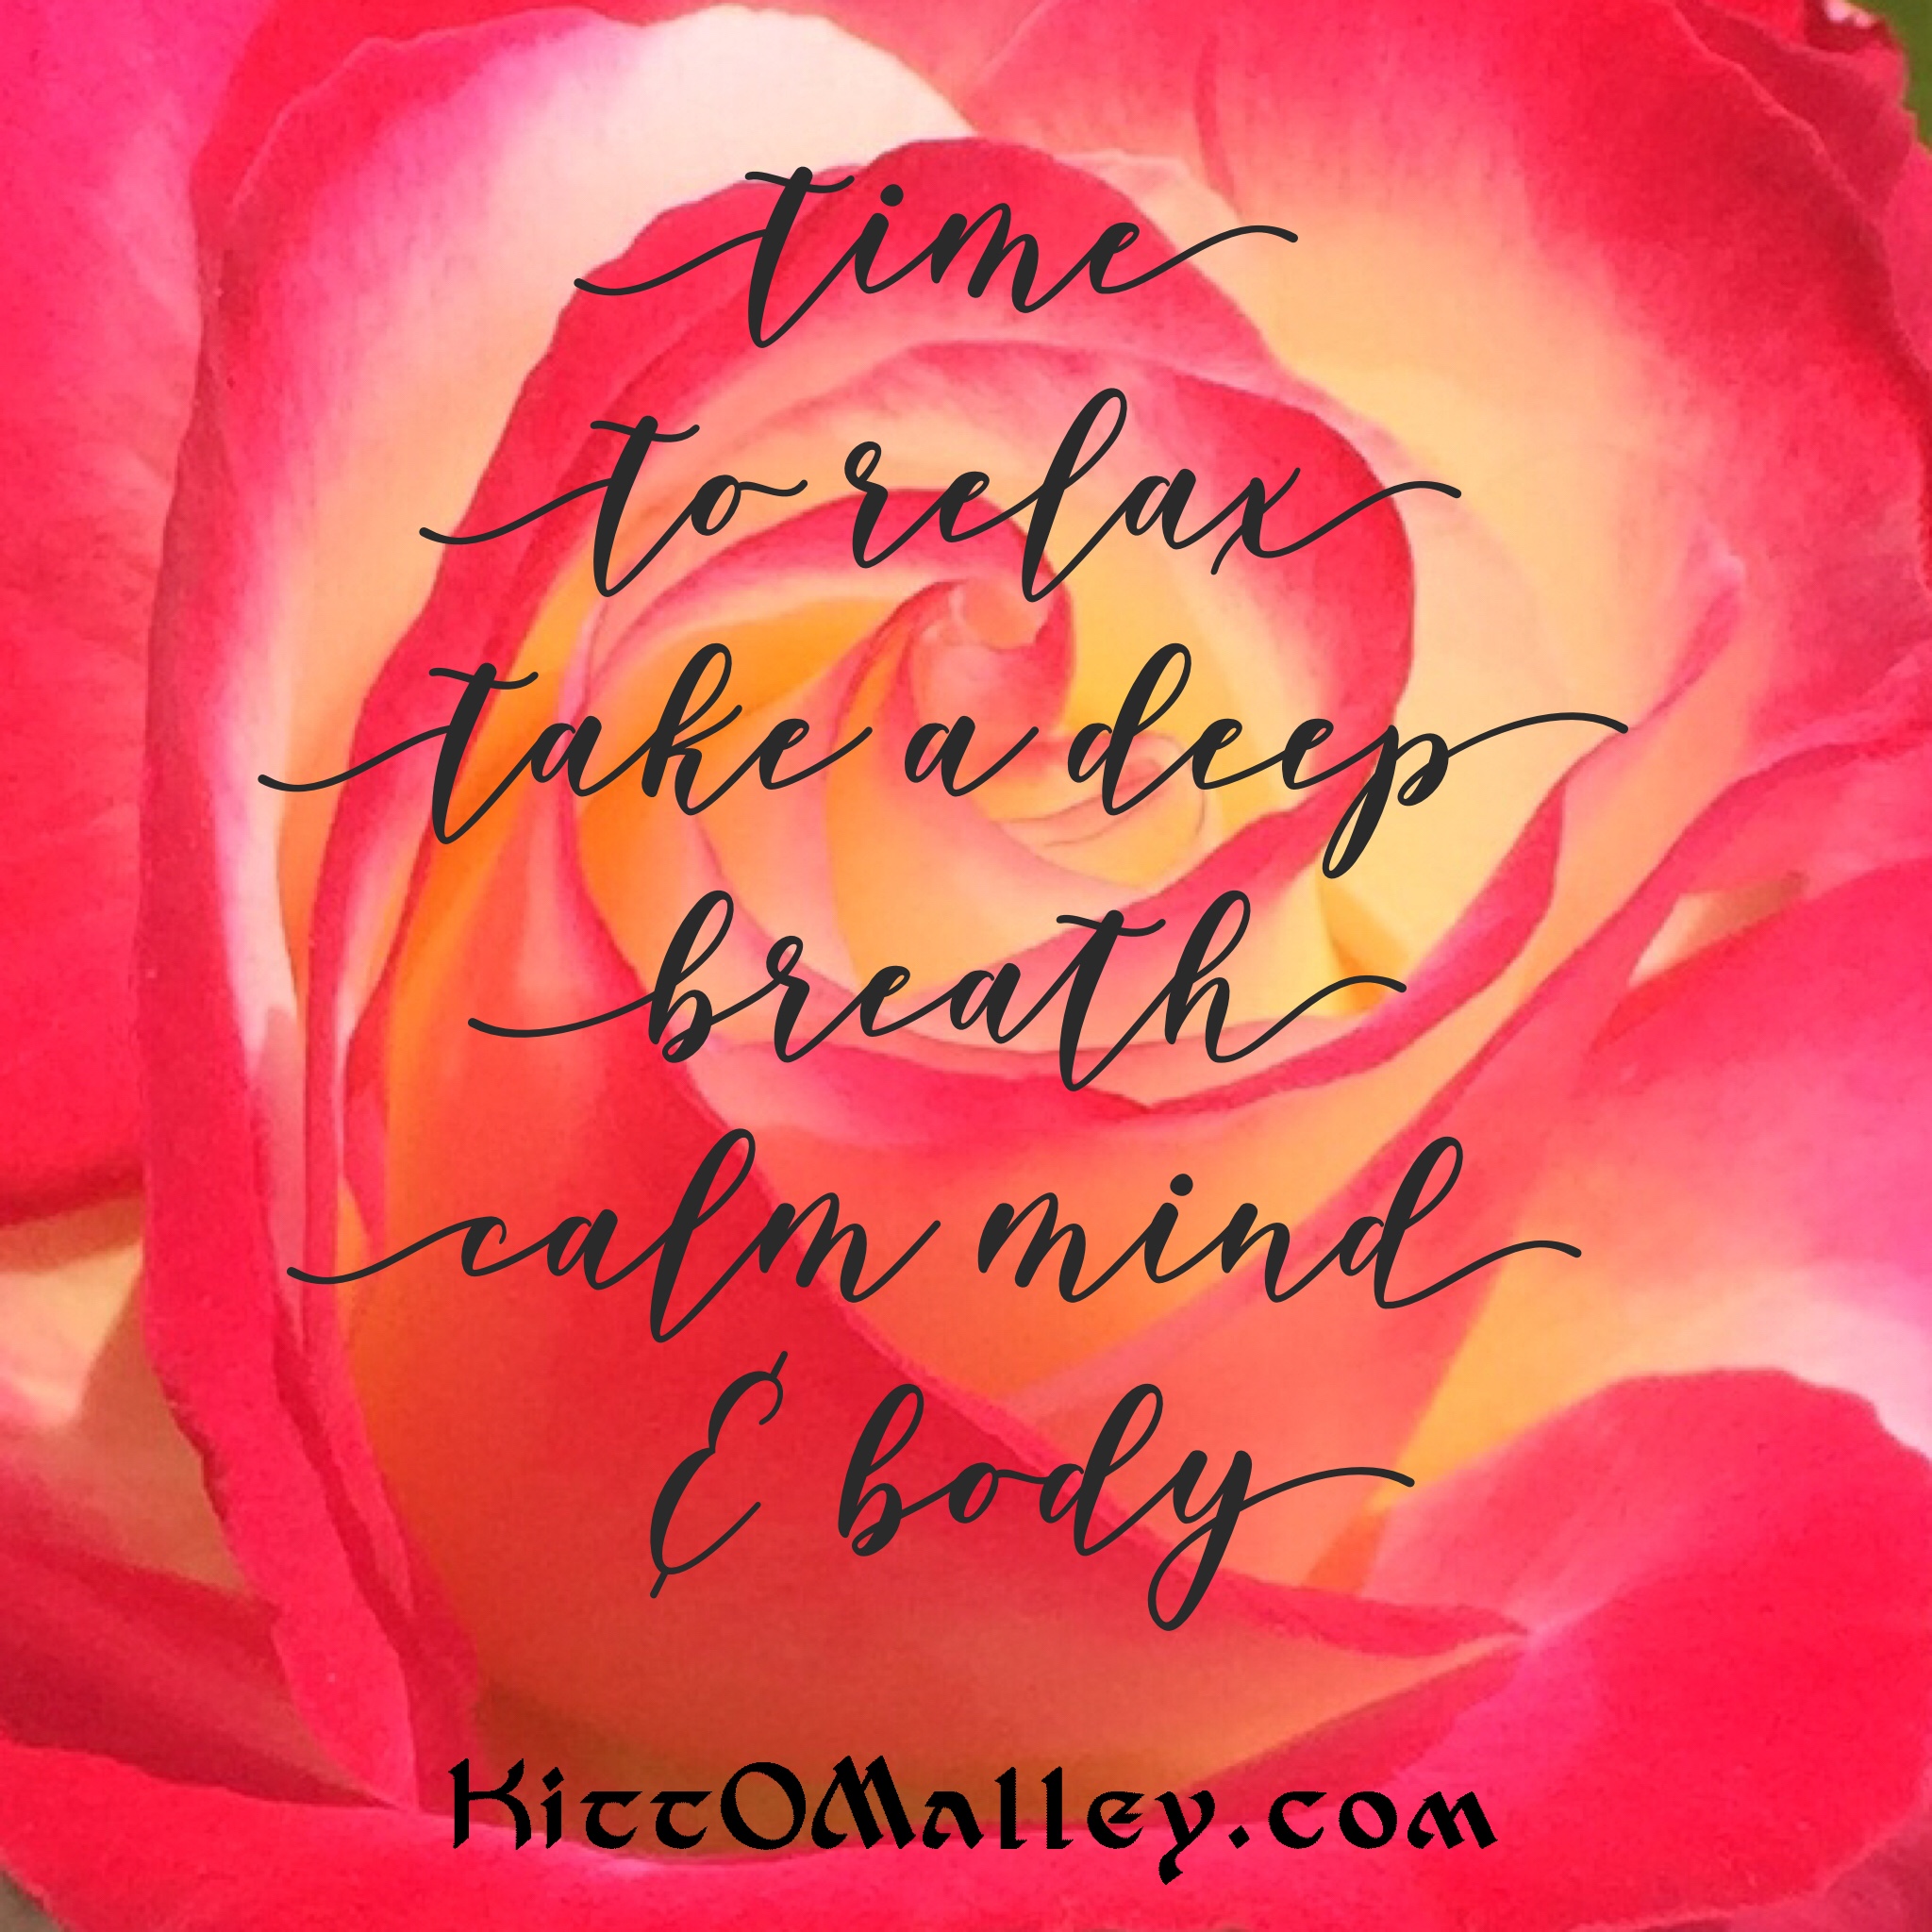 Time to relax, take a deep breath, calm mind & body. KittOMalley.com